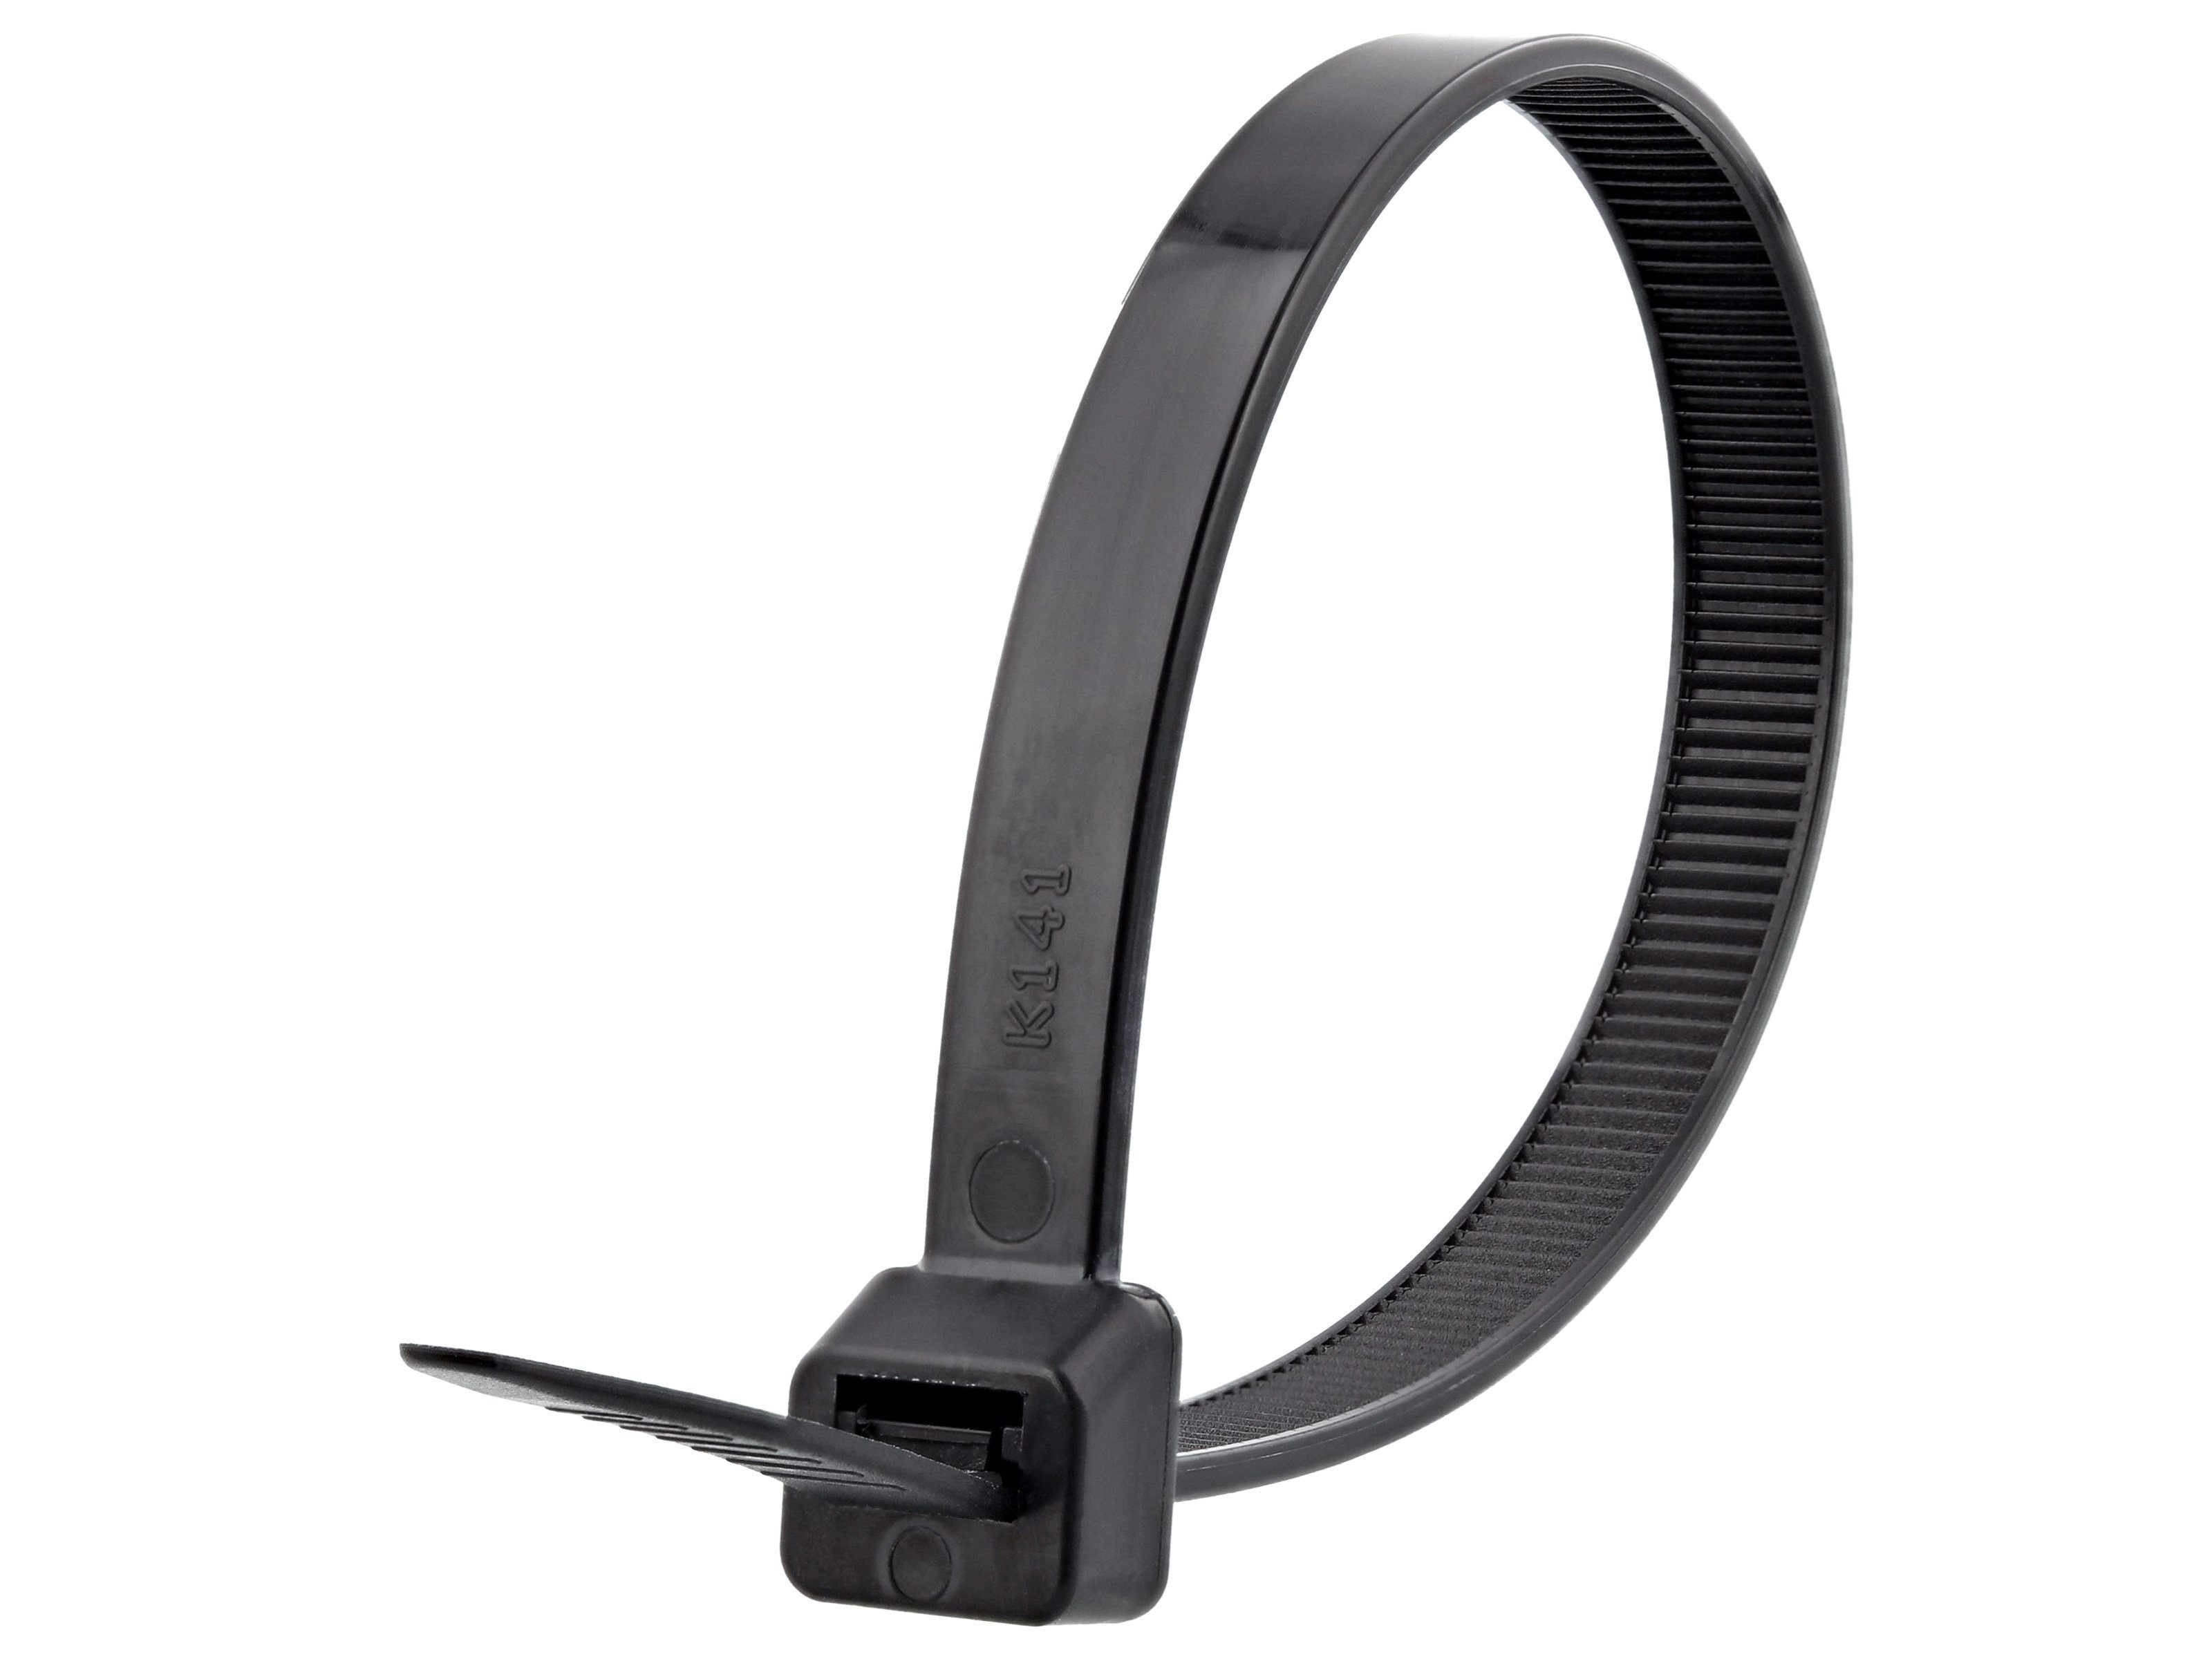 8 Inch Black UV Heavy Duty Cable Tie - 1000 Pack